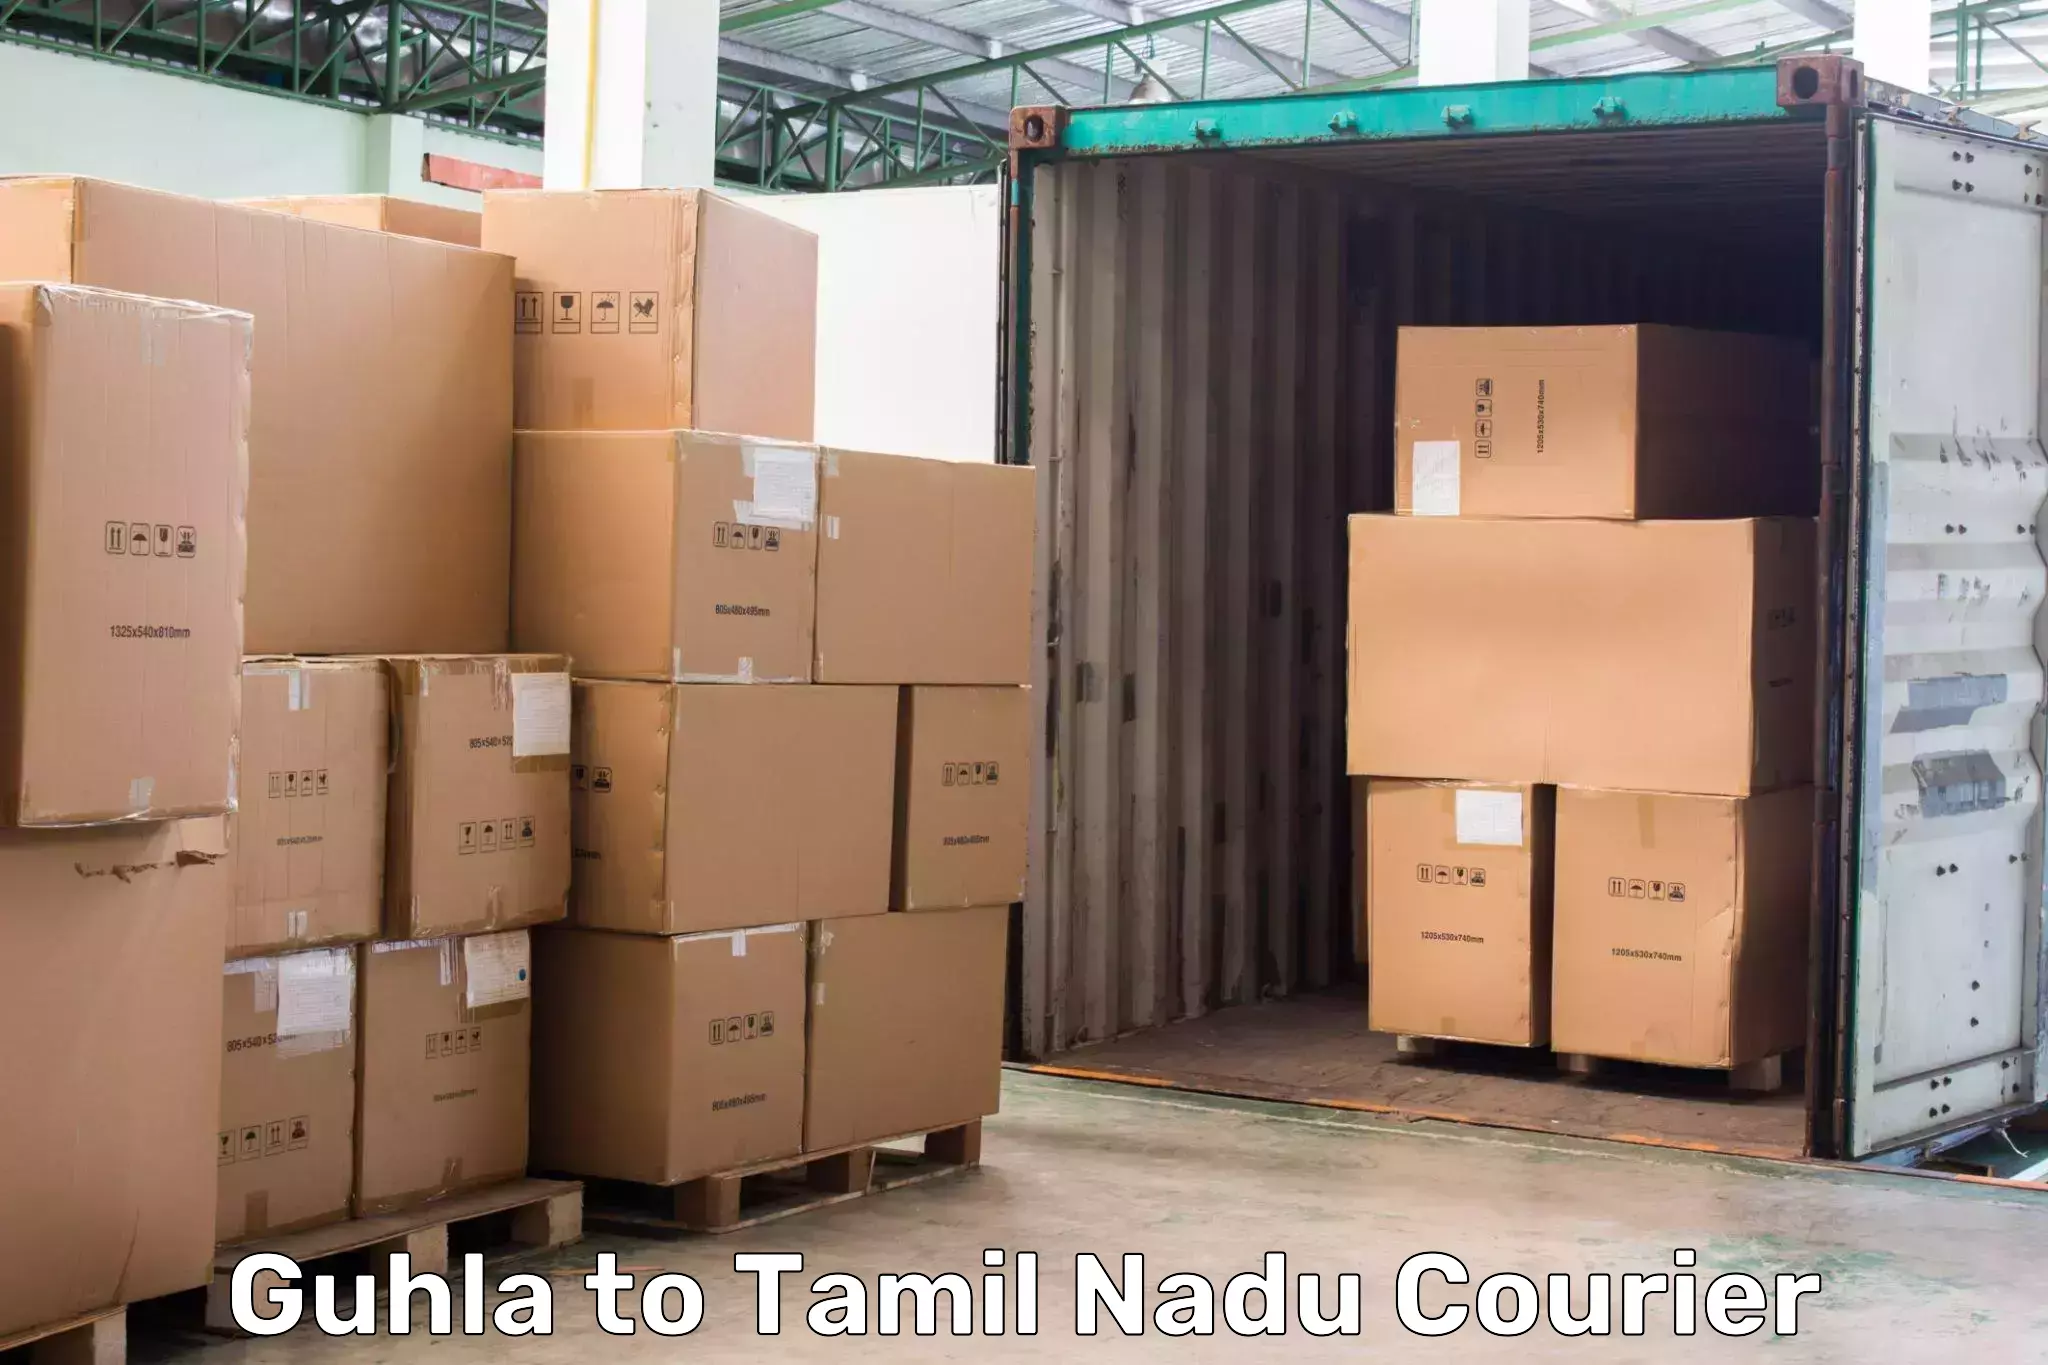 State-of-the-art courier technology Guhla to Kotagiri